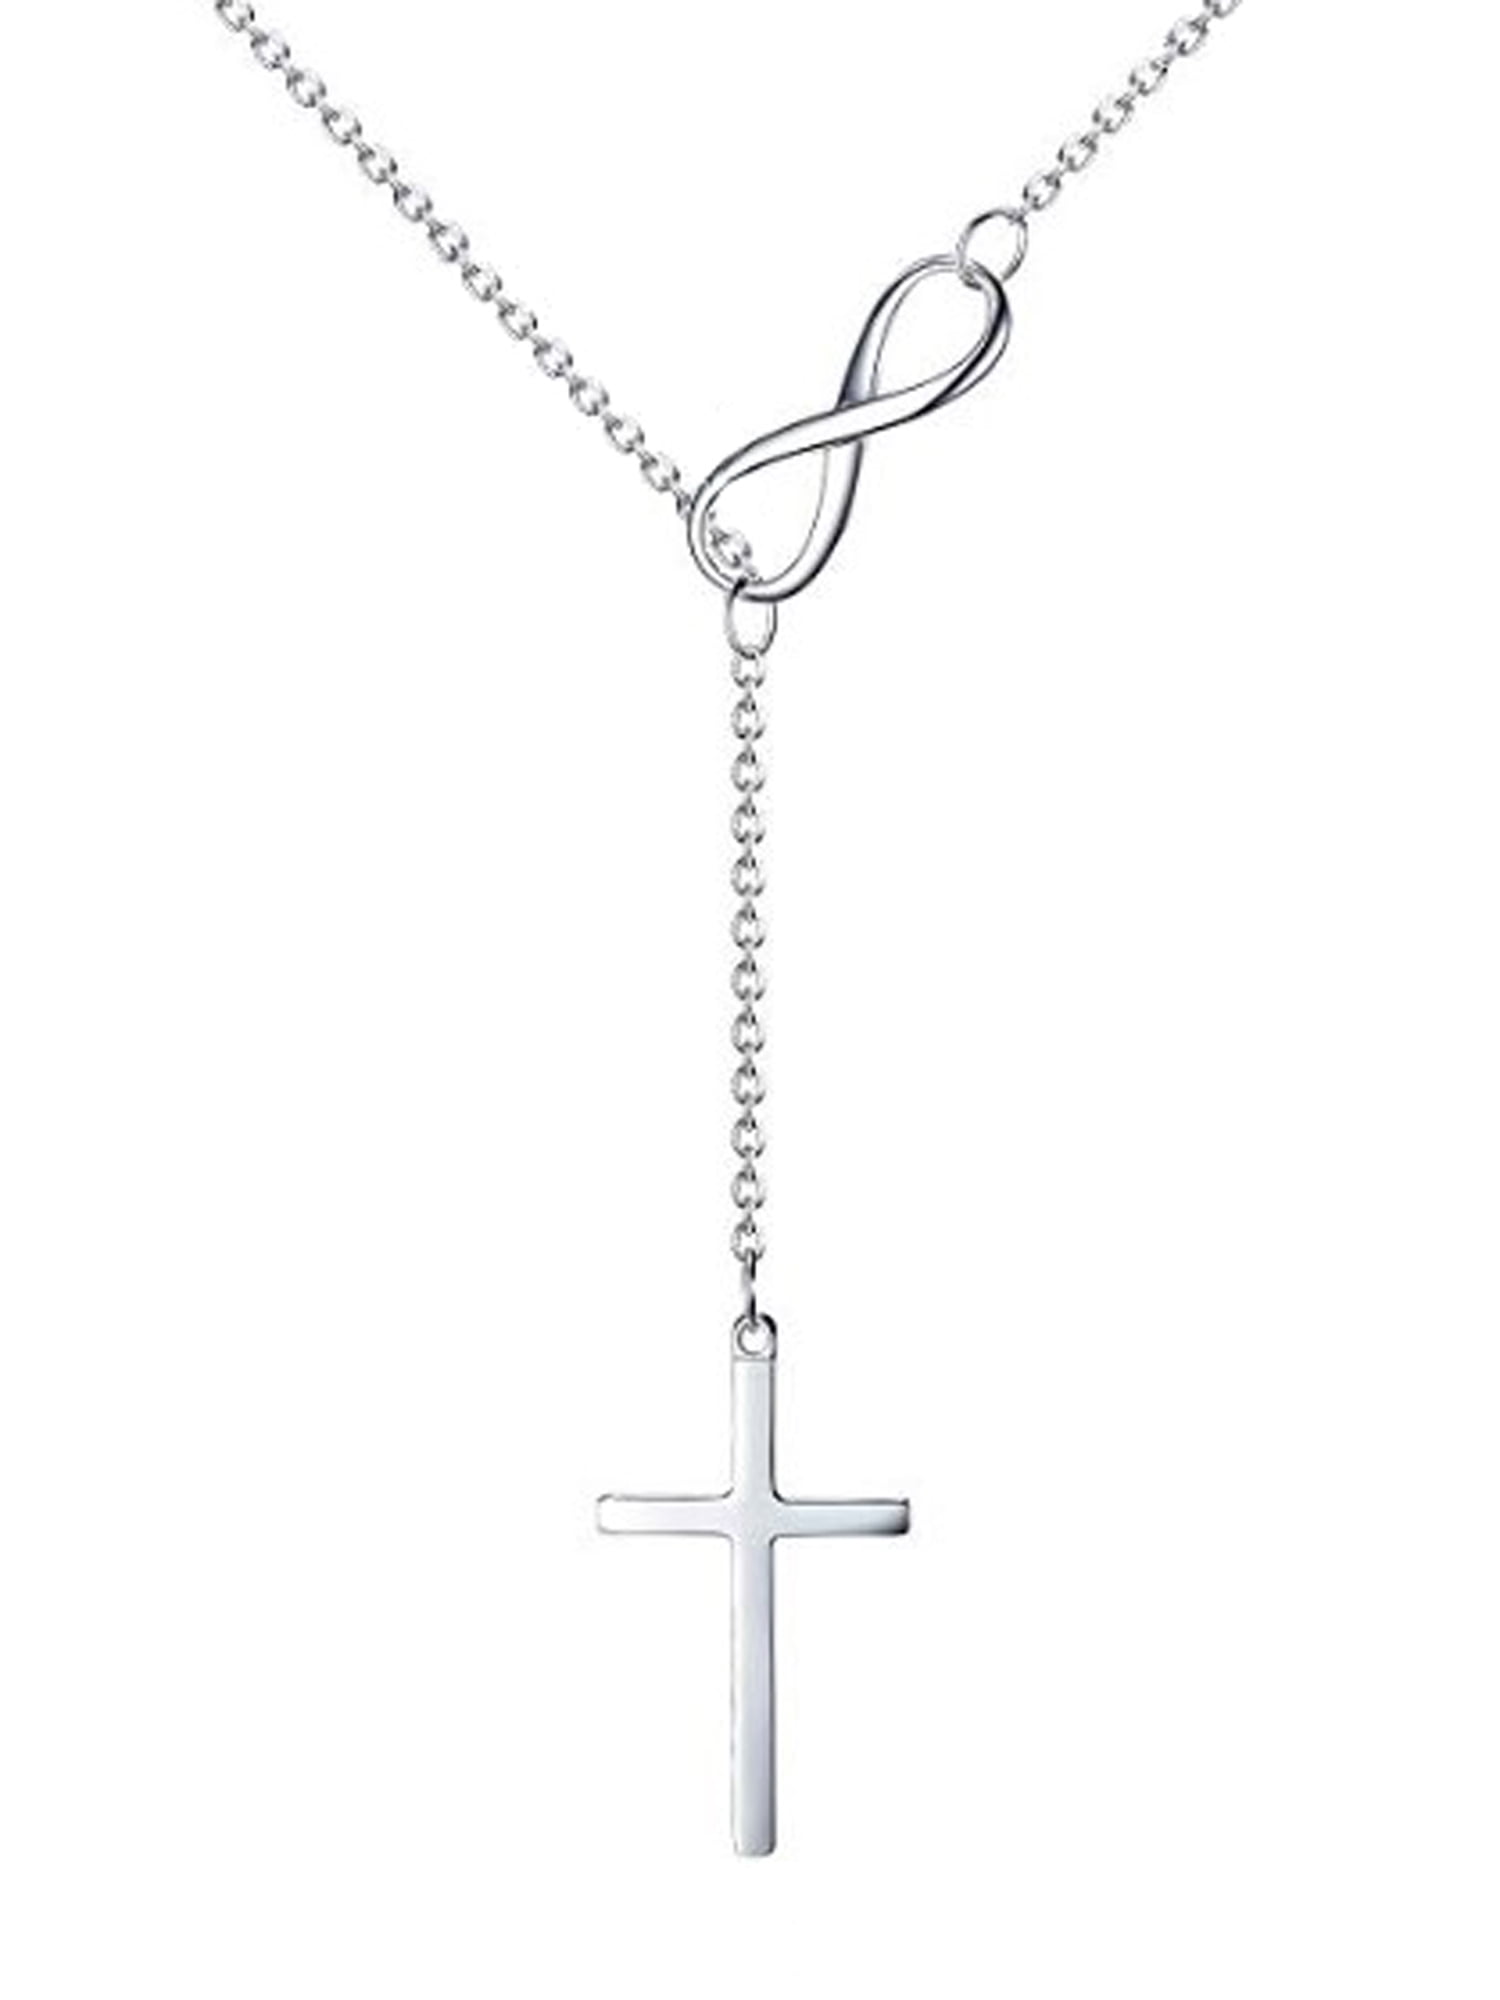 2015 New Silver Plated Cross Infinity Pendant Chain Necklace Fashion Jewelry BH